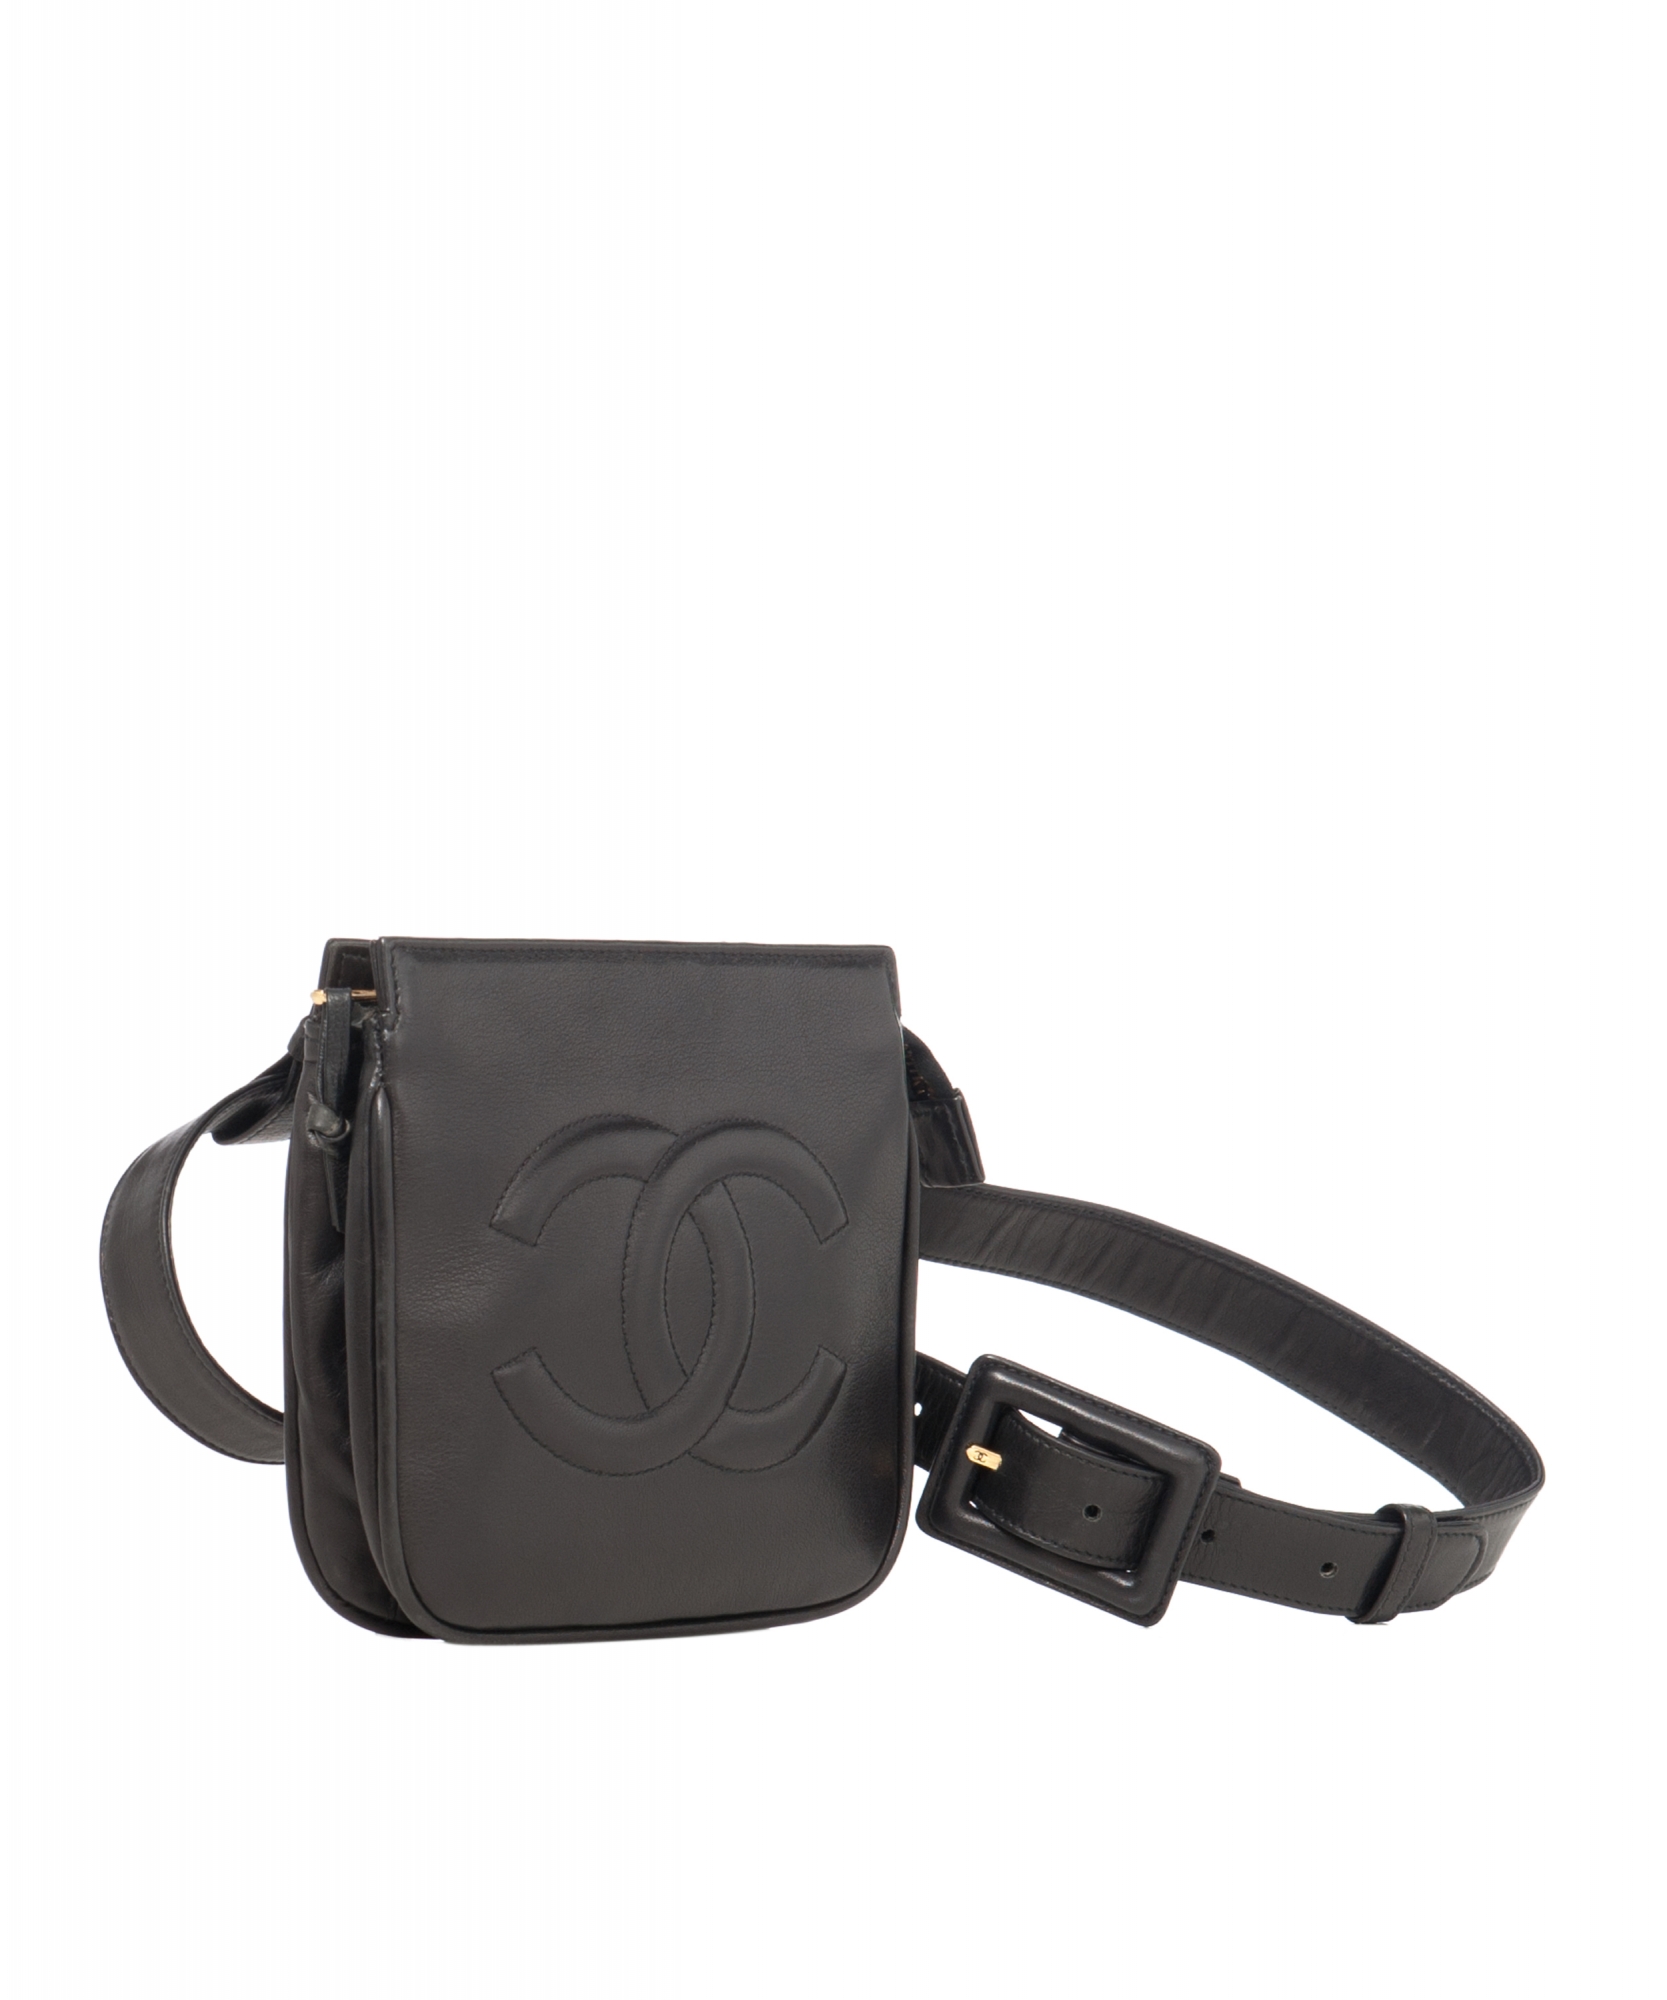 Chanel 'Fanny Pack' in Black Leather - Chanel